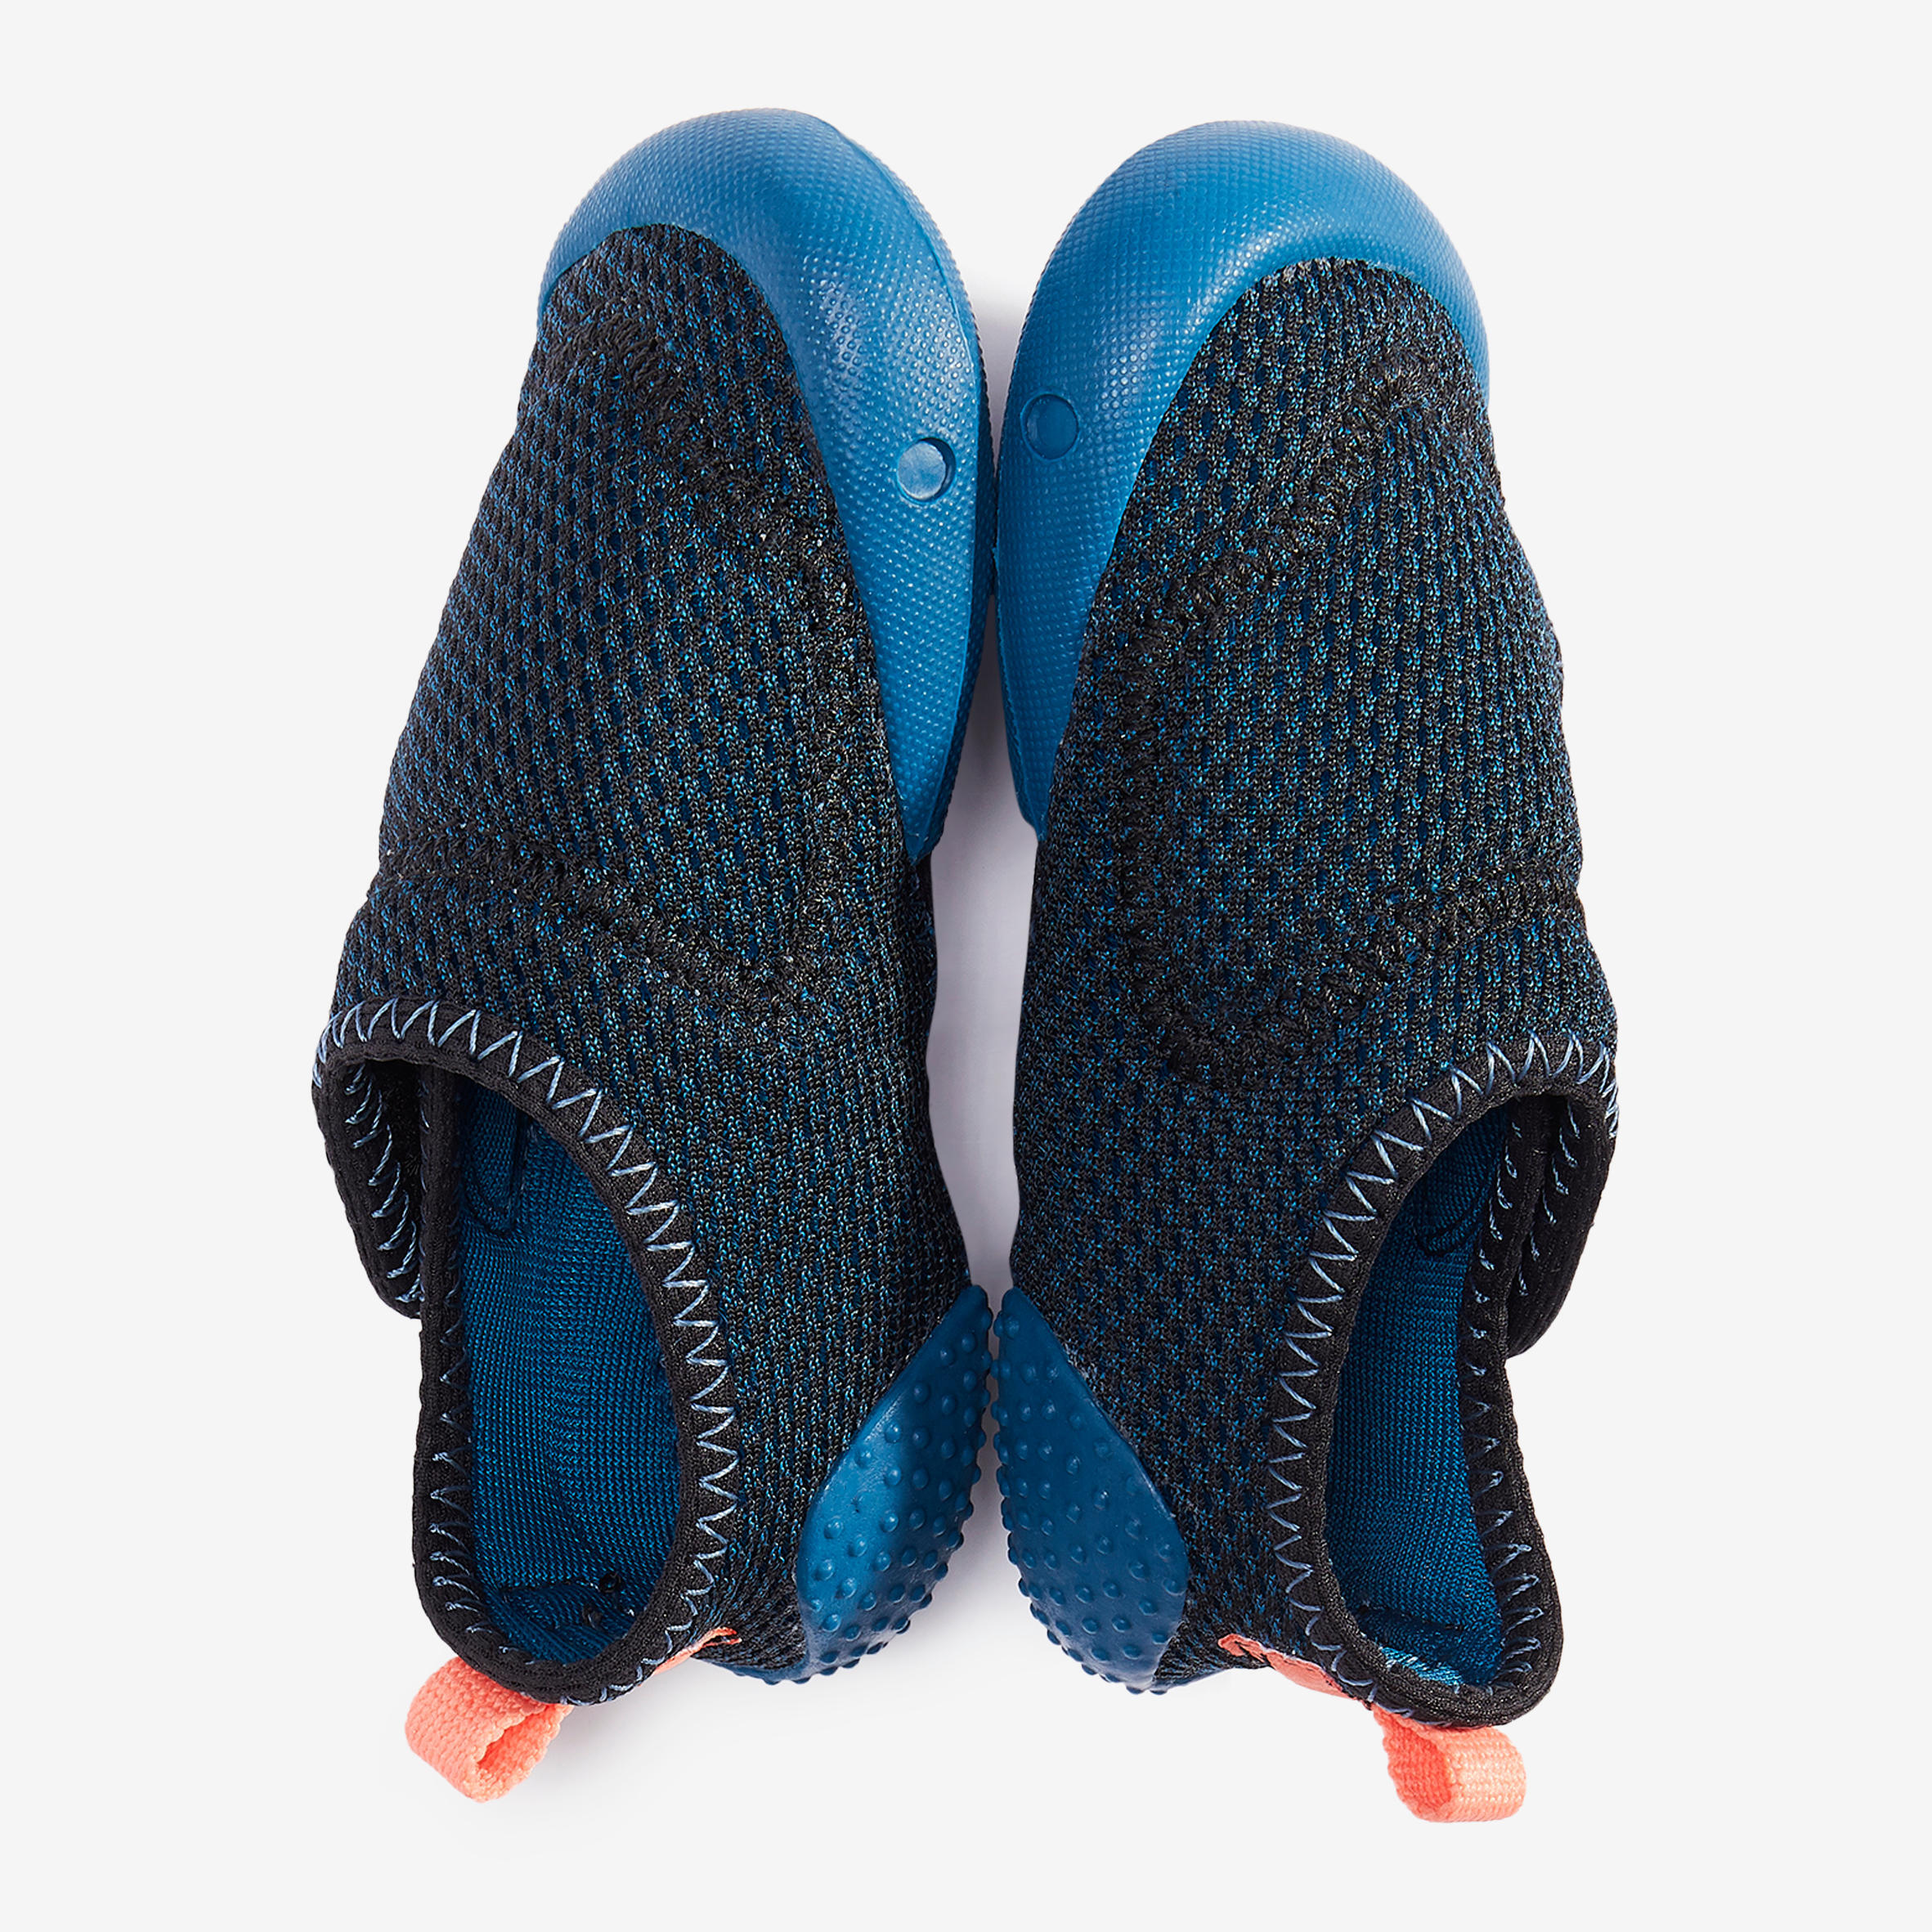 Kids' Non-Slip and Breathable Bootee - Blue 5/8